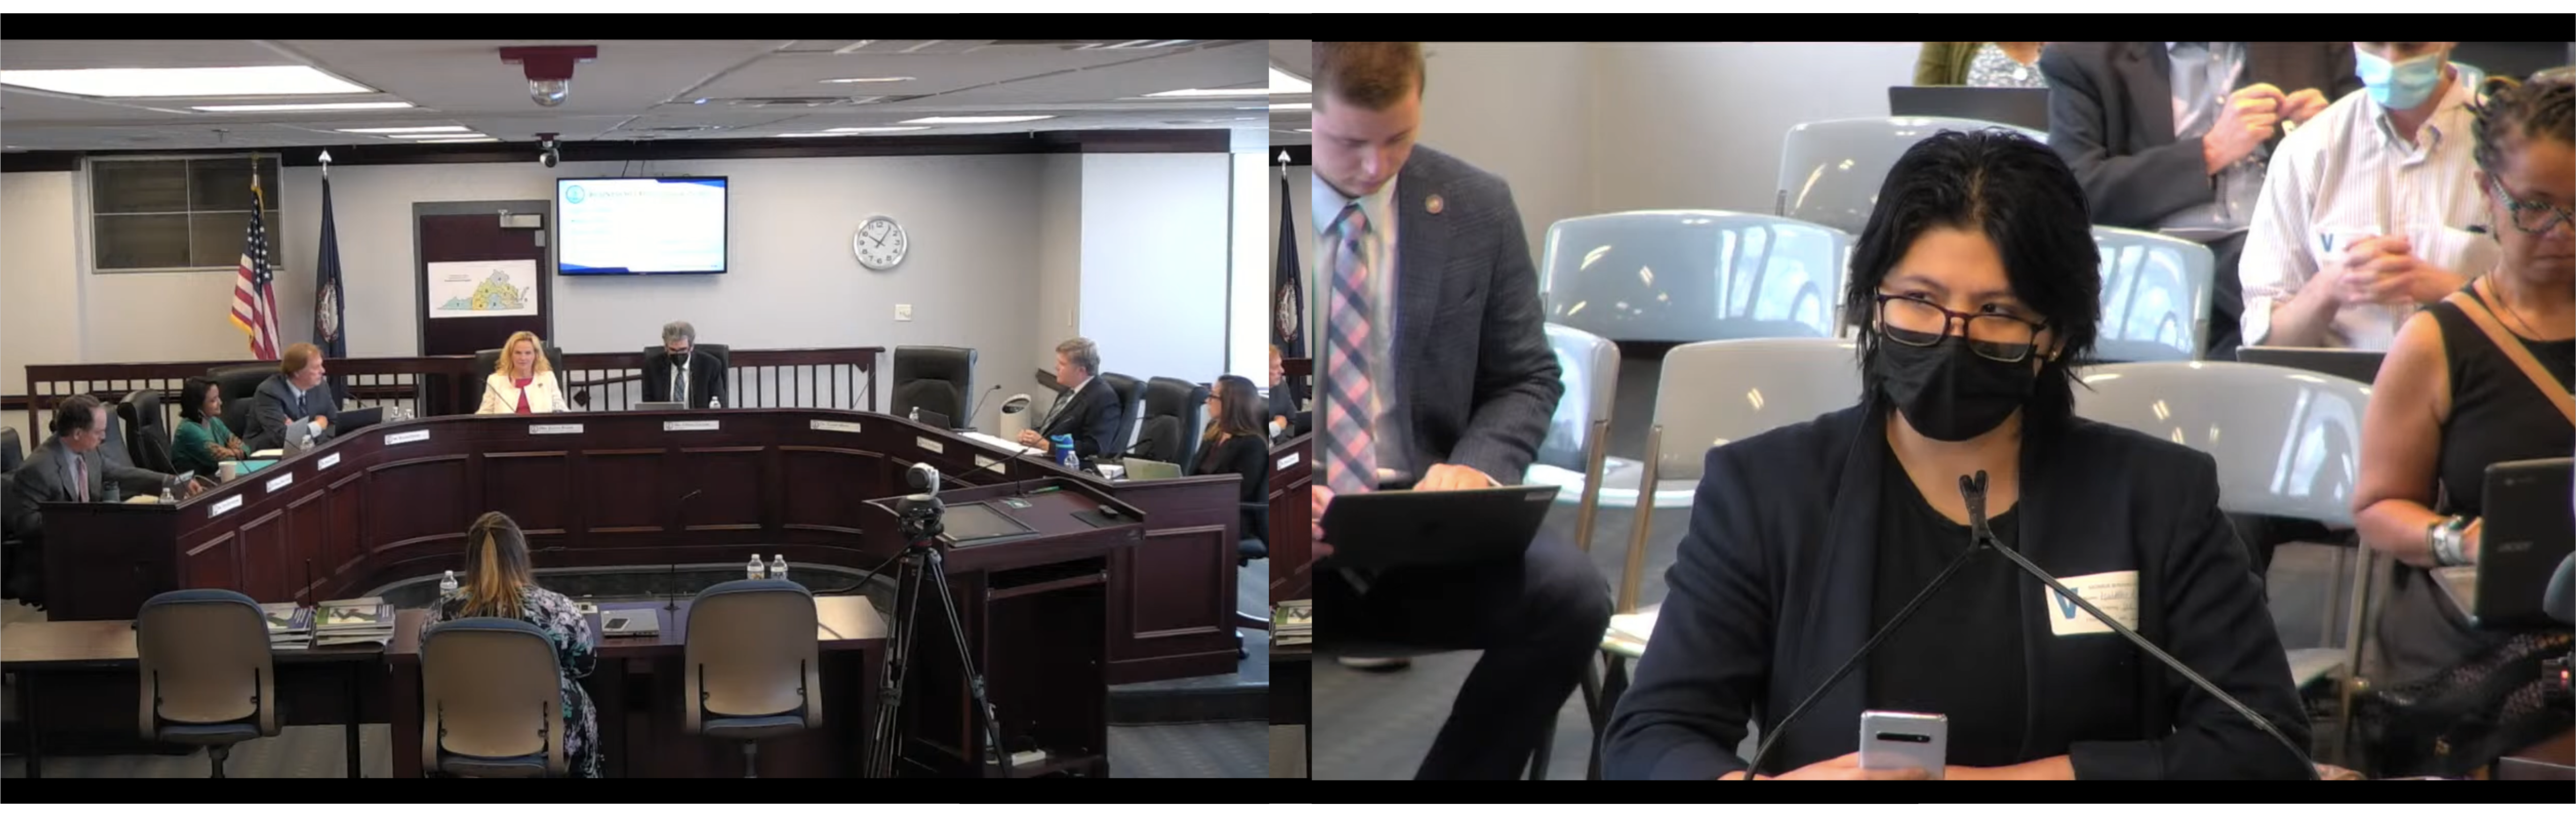 Policy and Communications Team Lead Zowee Aquino (right) gives public comment about the revised History SOLs to the Virginia Board of Education (VBOE) members and Virginia Superintendent during August 17th Board Meeting. Images provided from the Virginia DOE livestream.